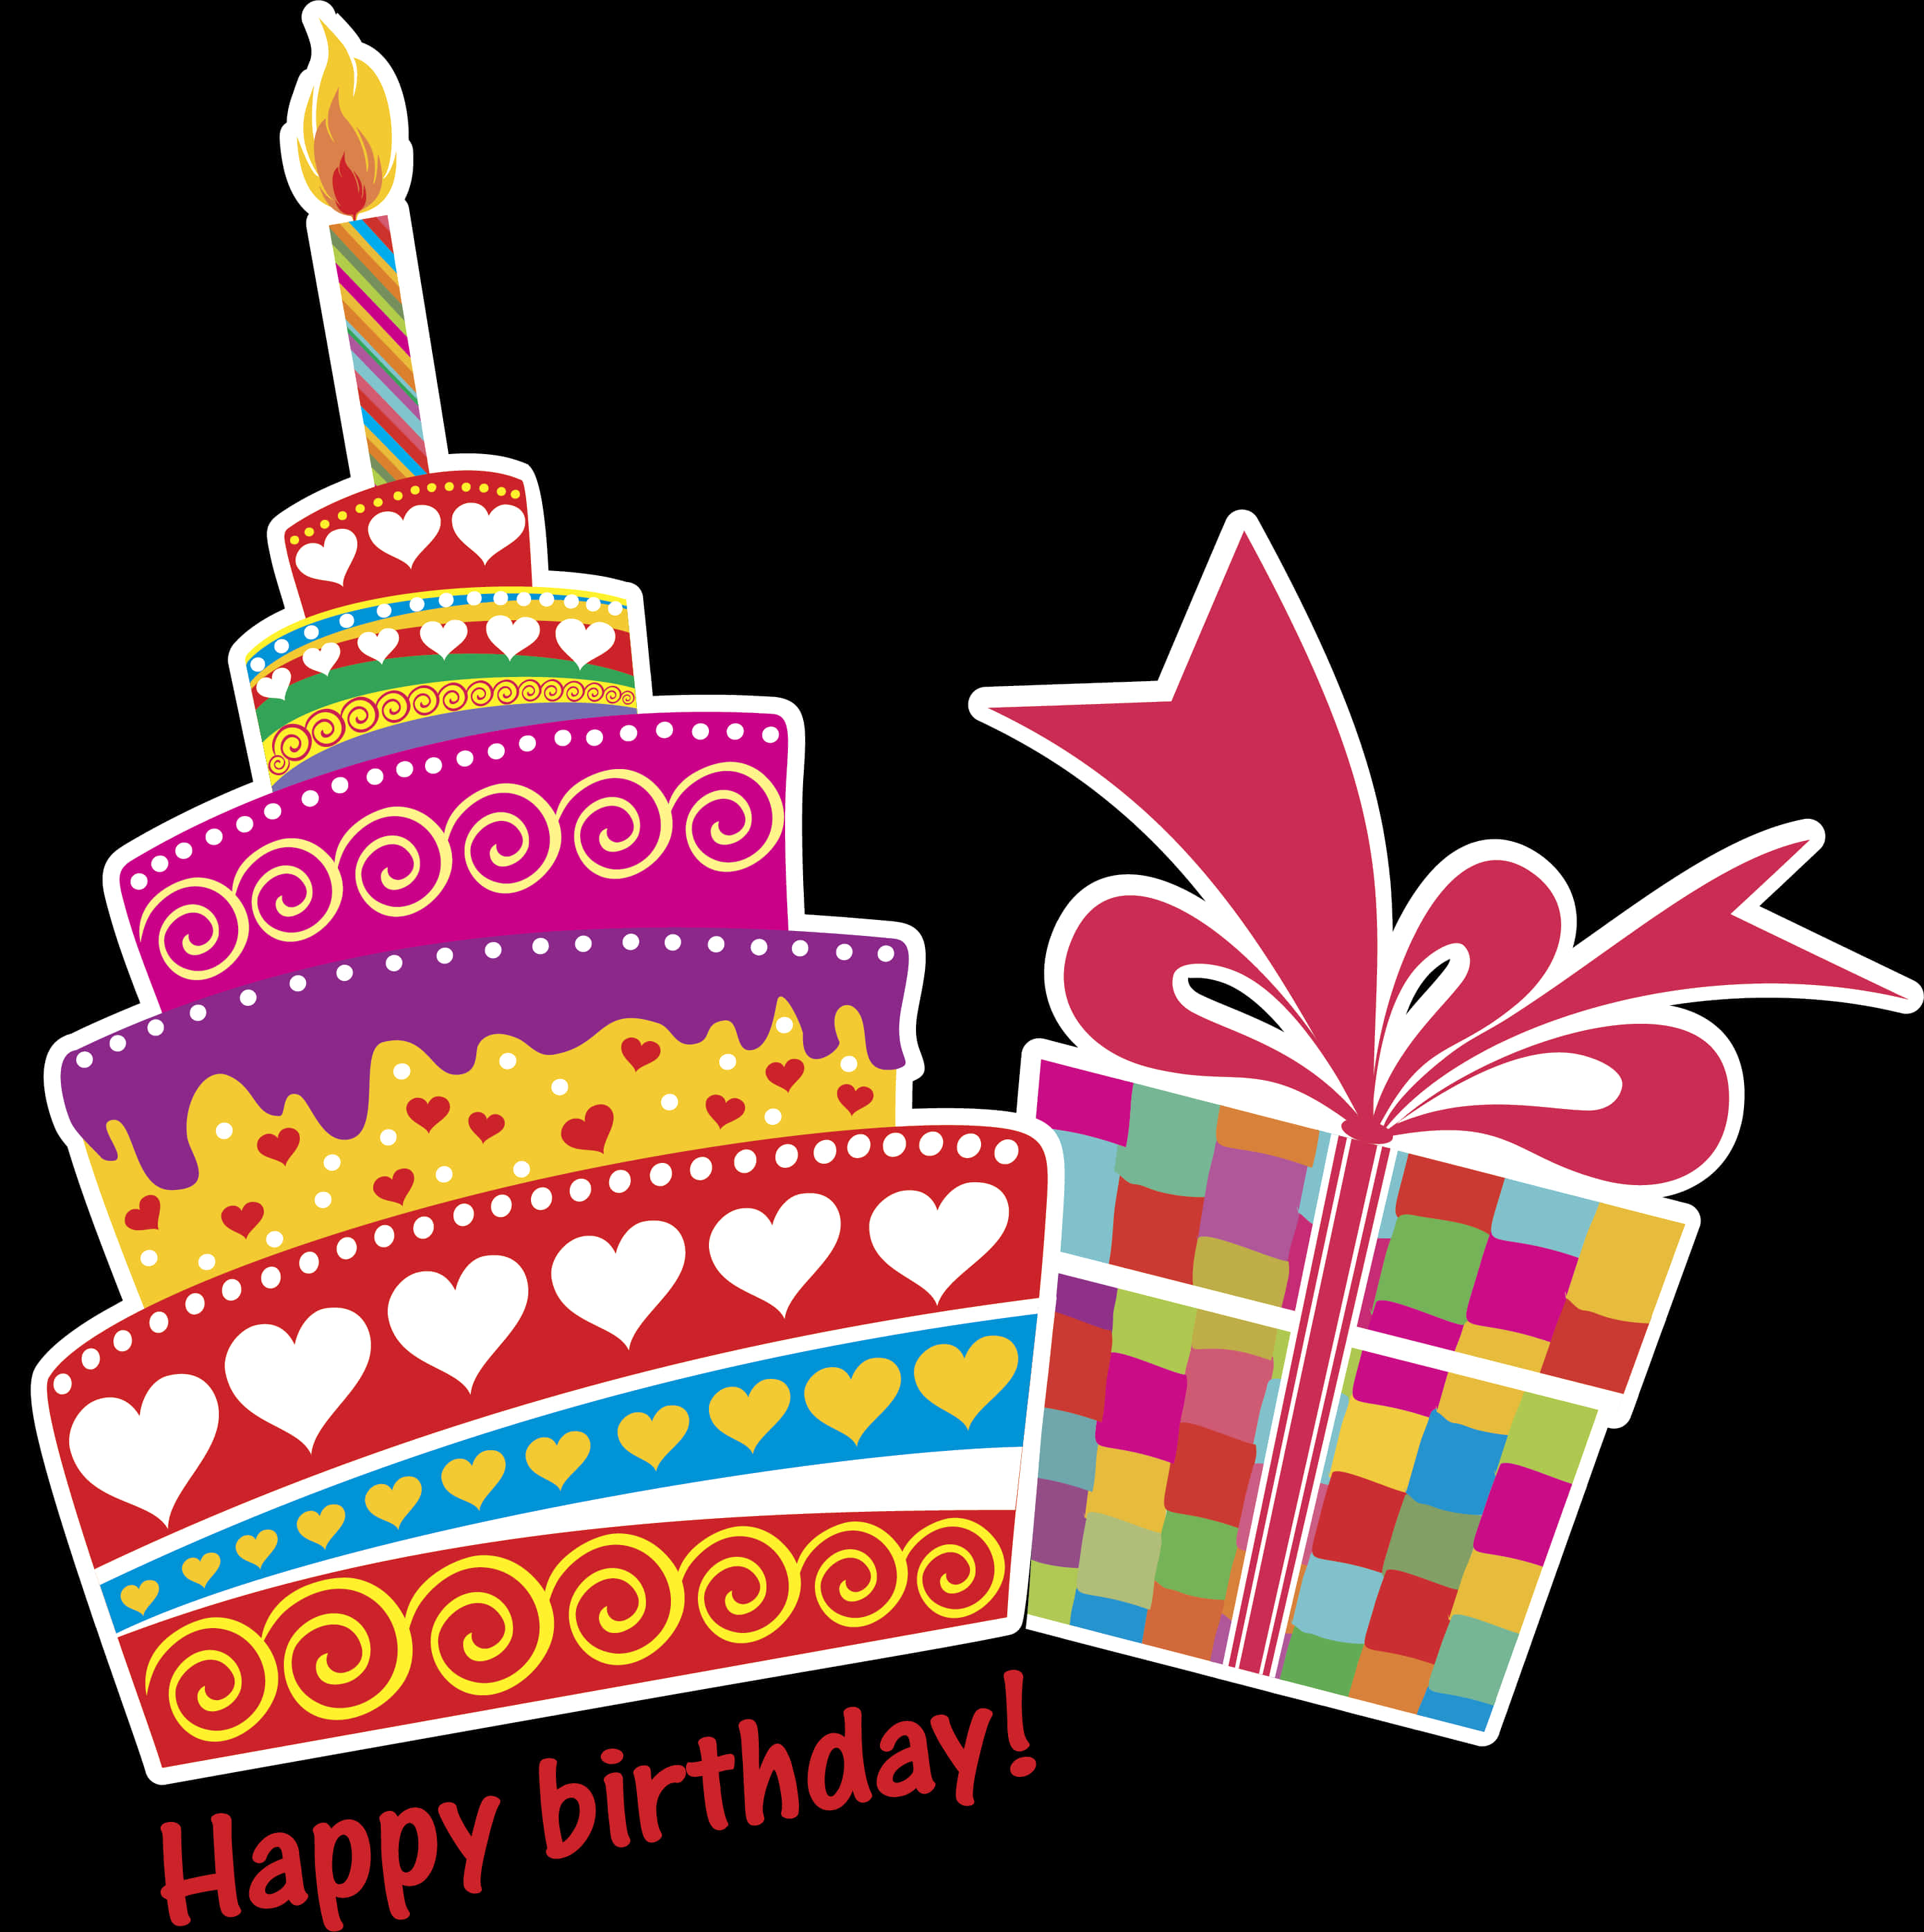 Colorful Birthday Cakeand Gift Illustration PNG